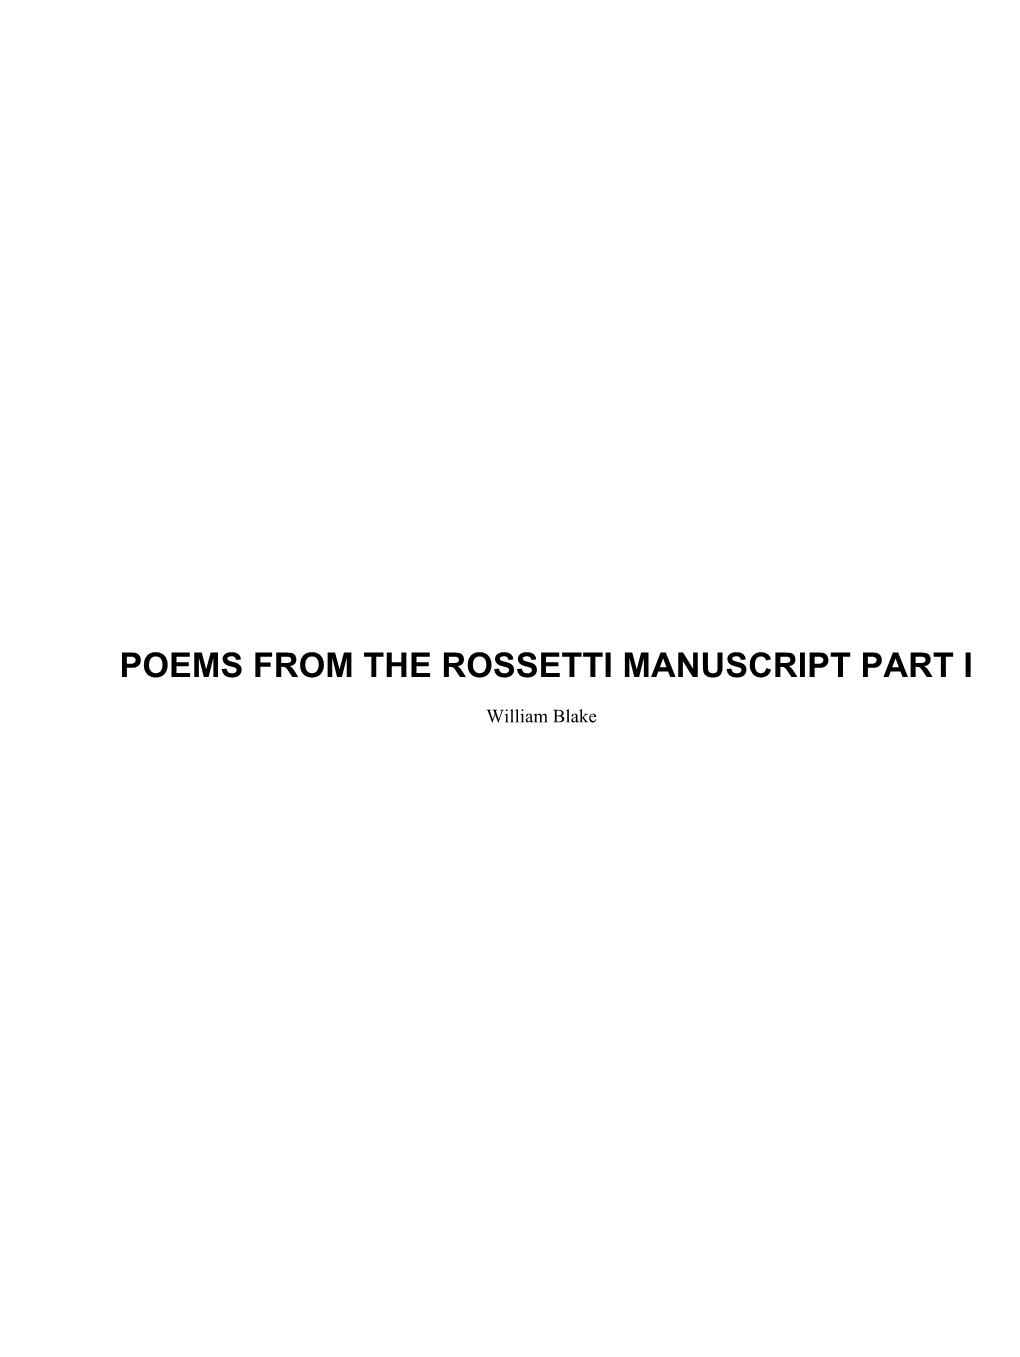 Poems from the Rossetti Manuscript Part I